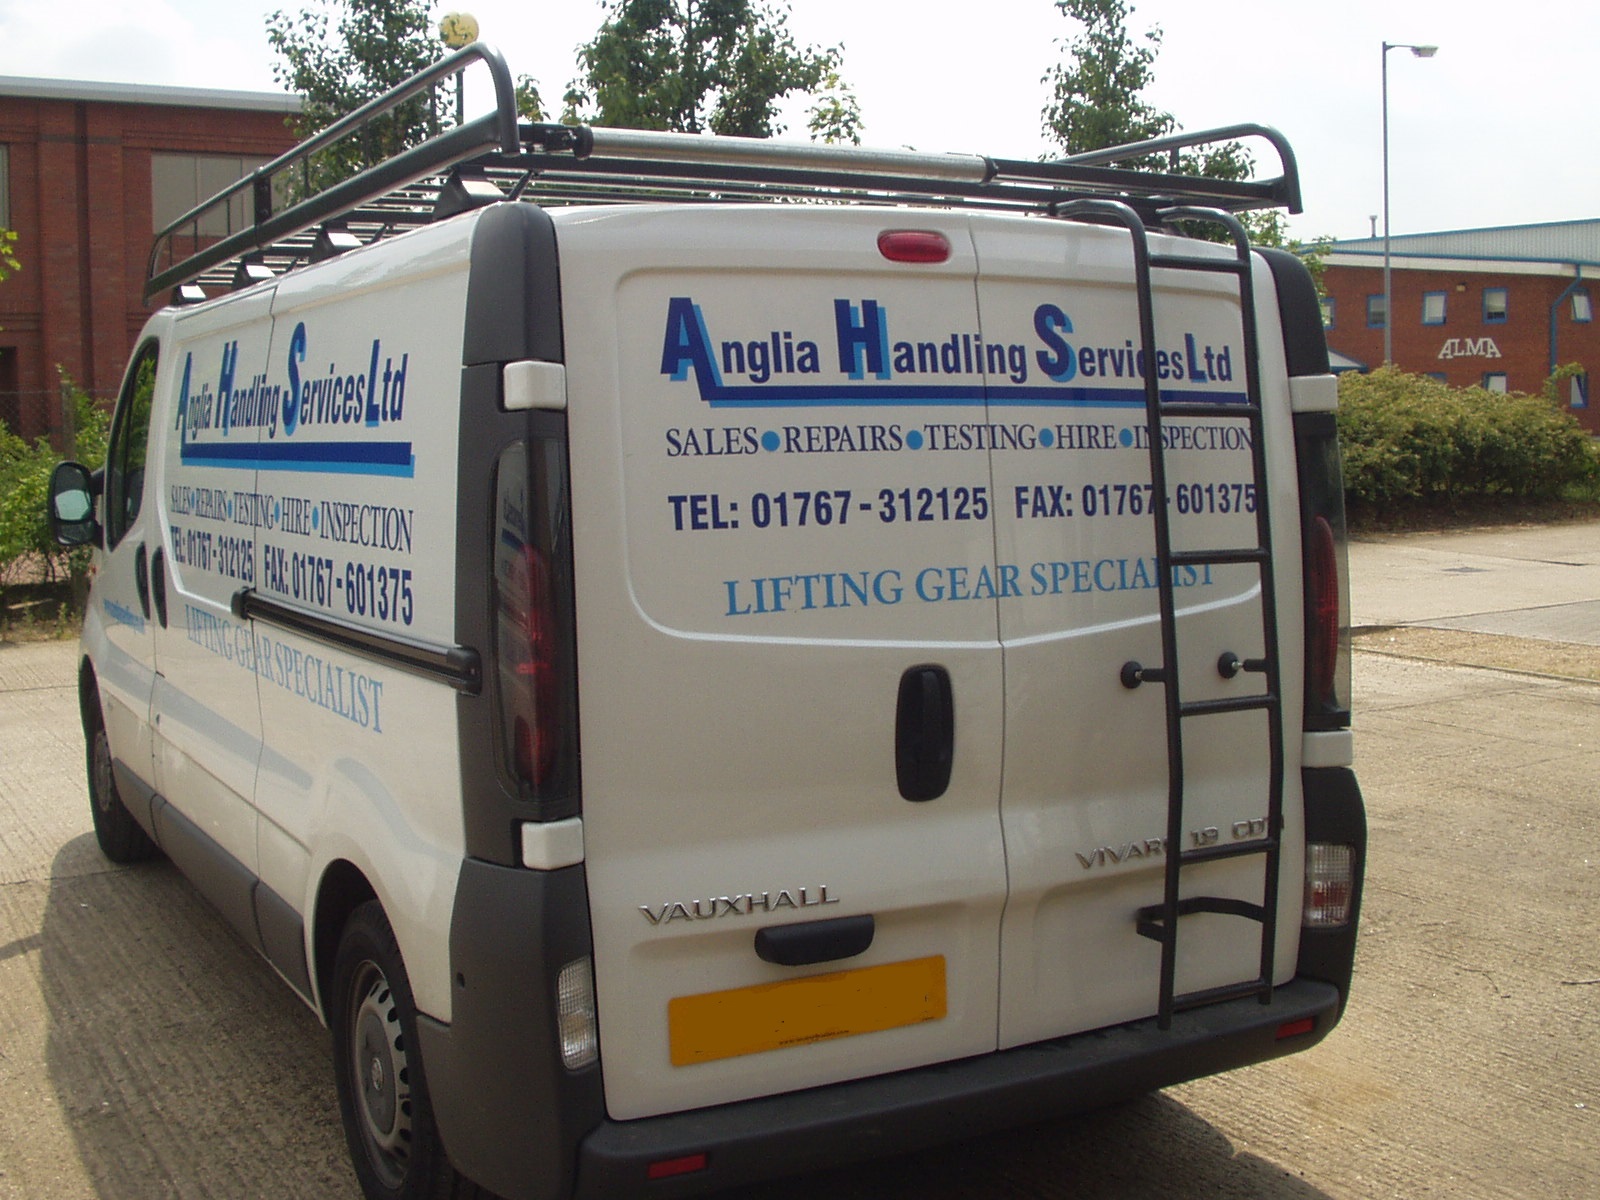 Main image for Anglia Handling Services Ltd